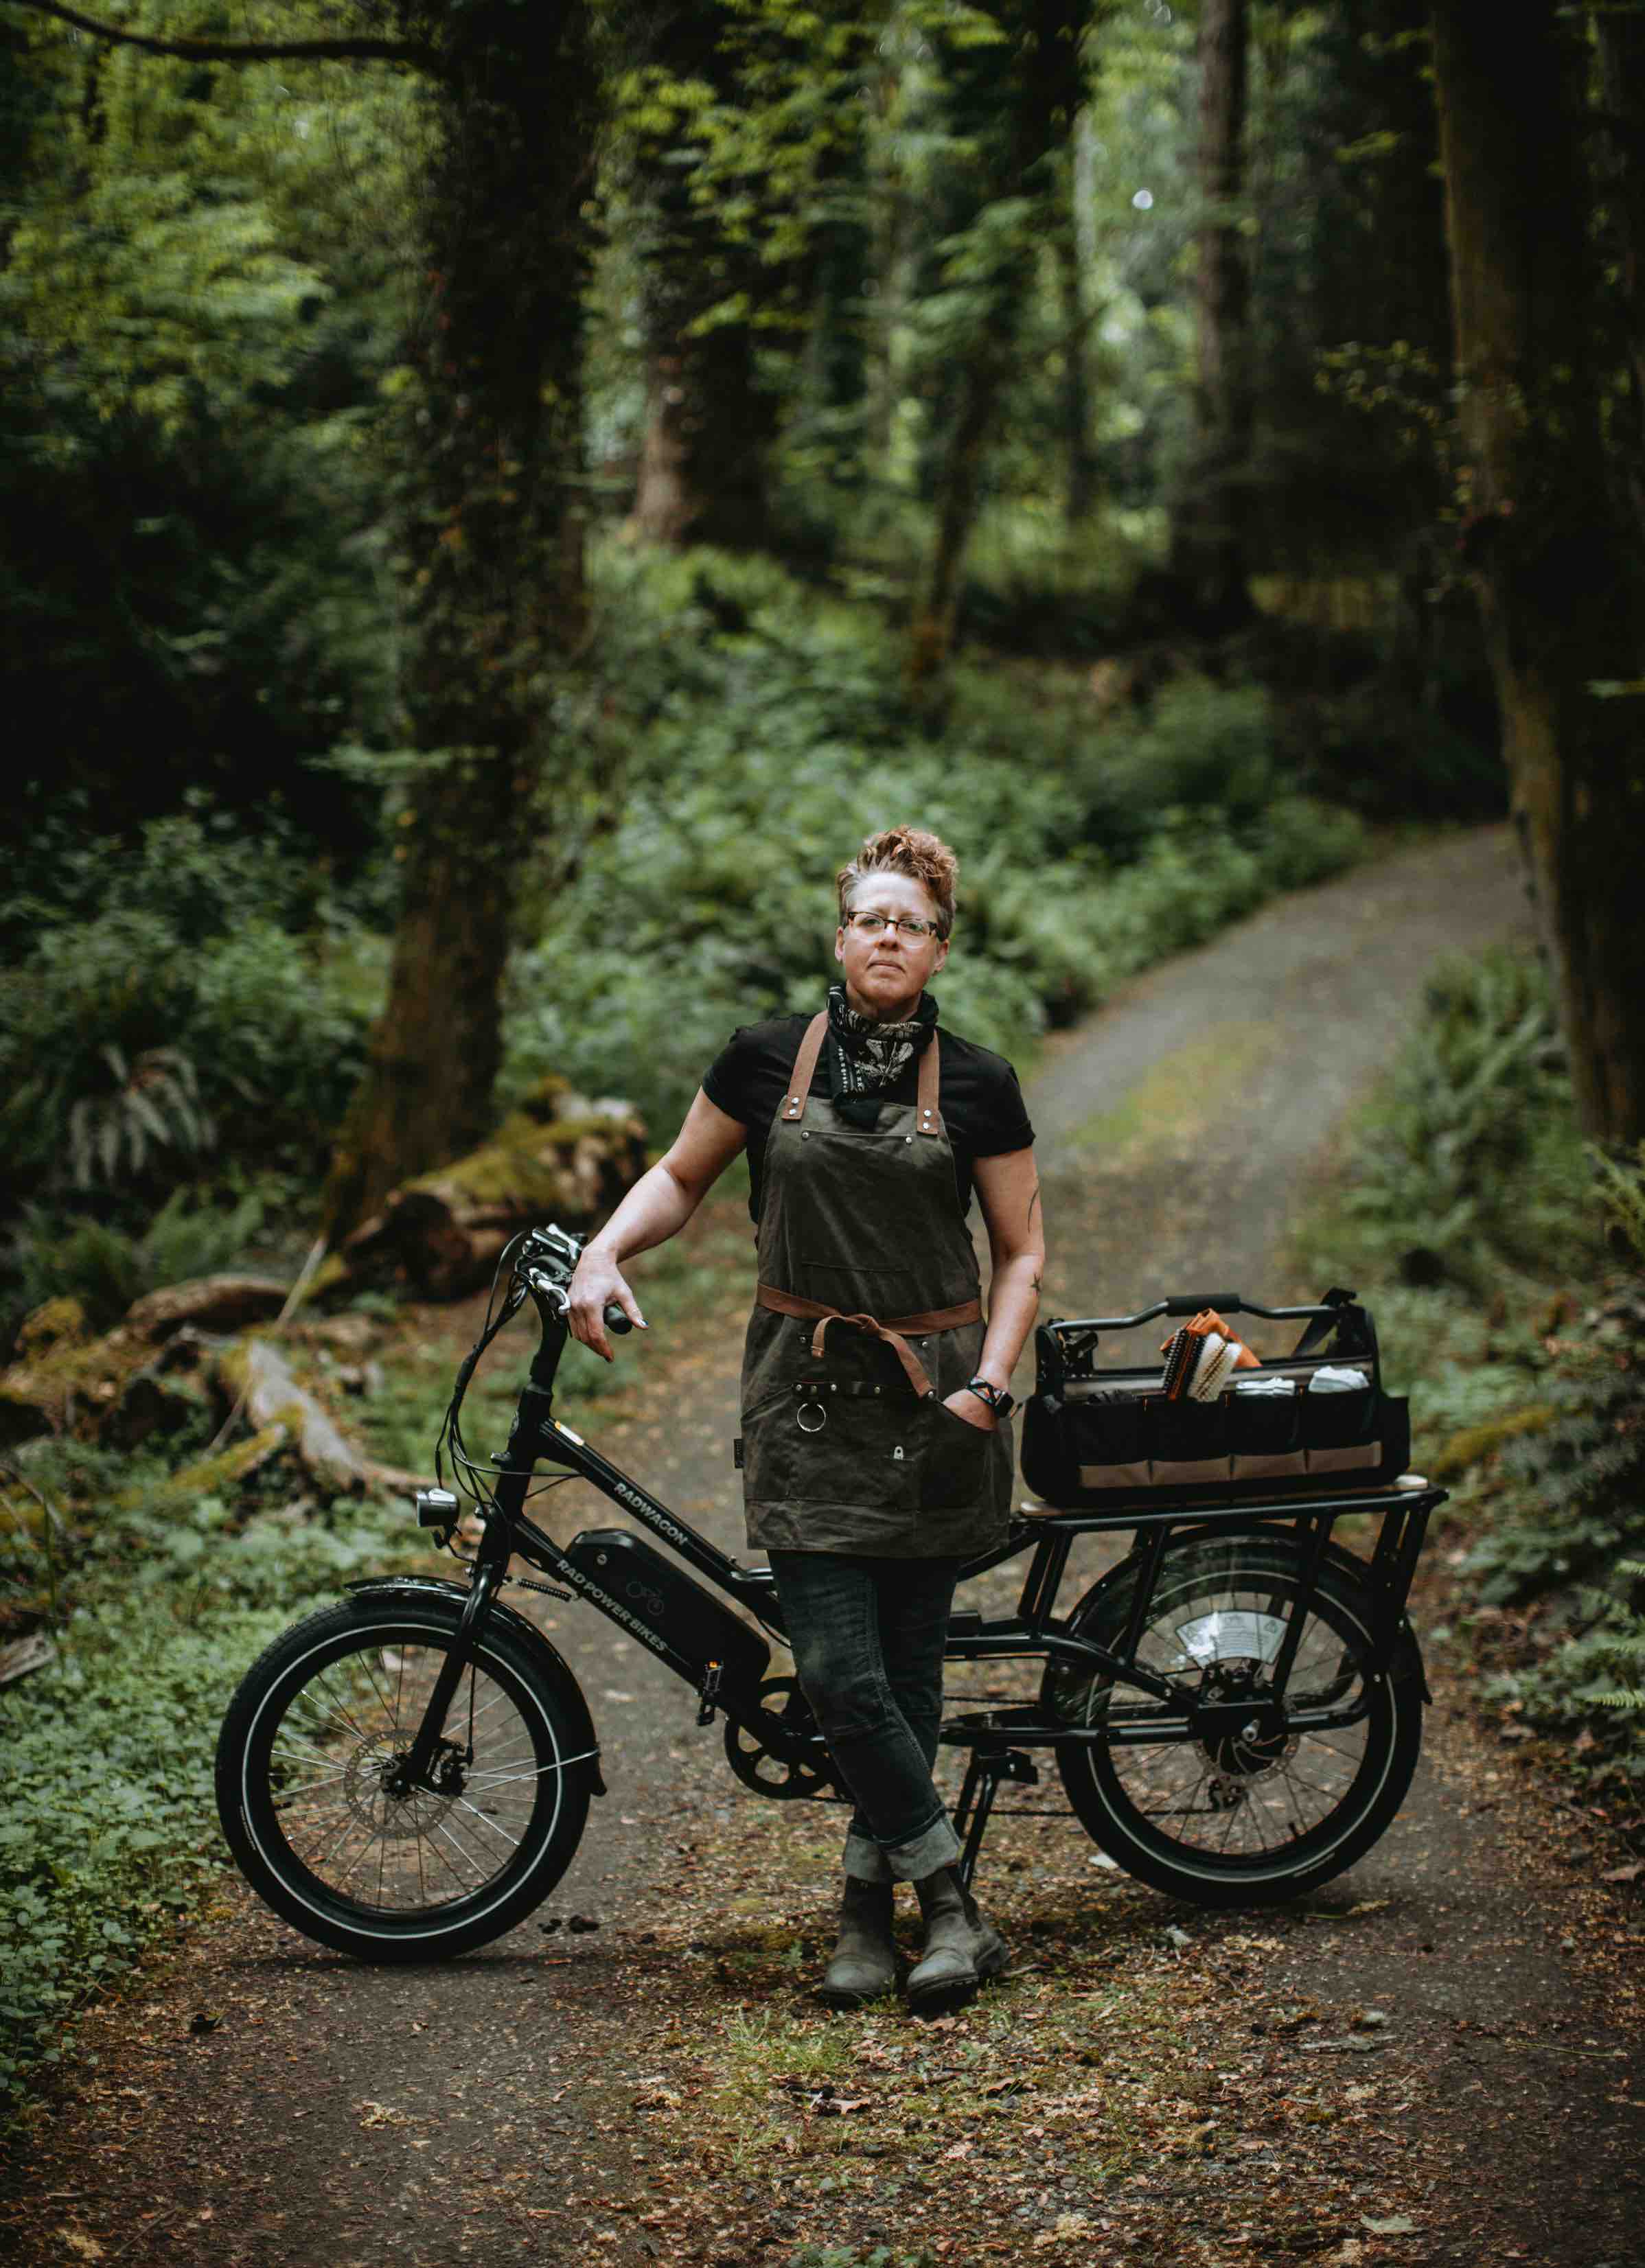 A woman stands in the woods with an electric cargo bike equipped with barbershop gear.